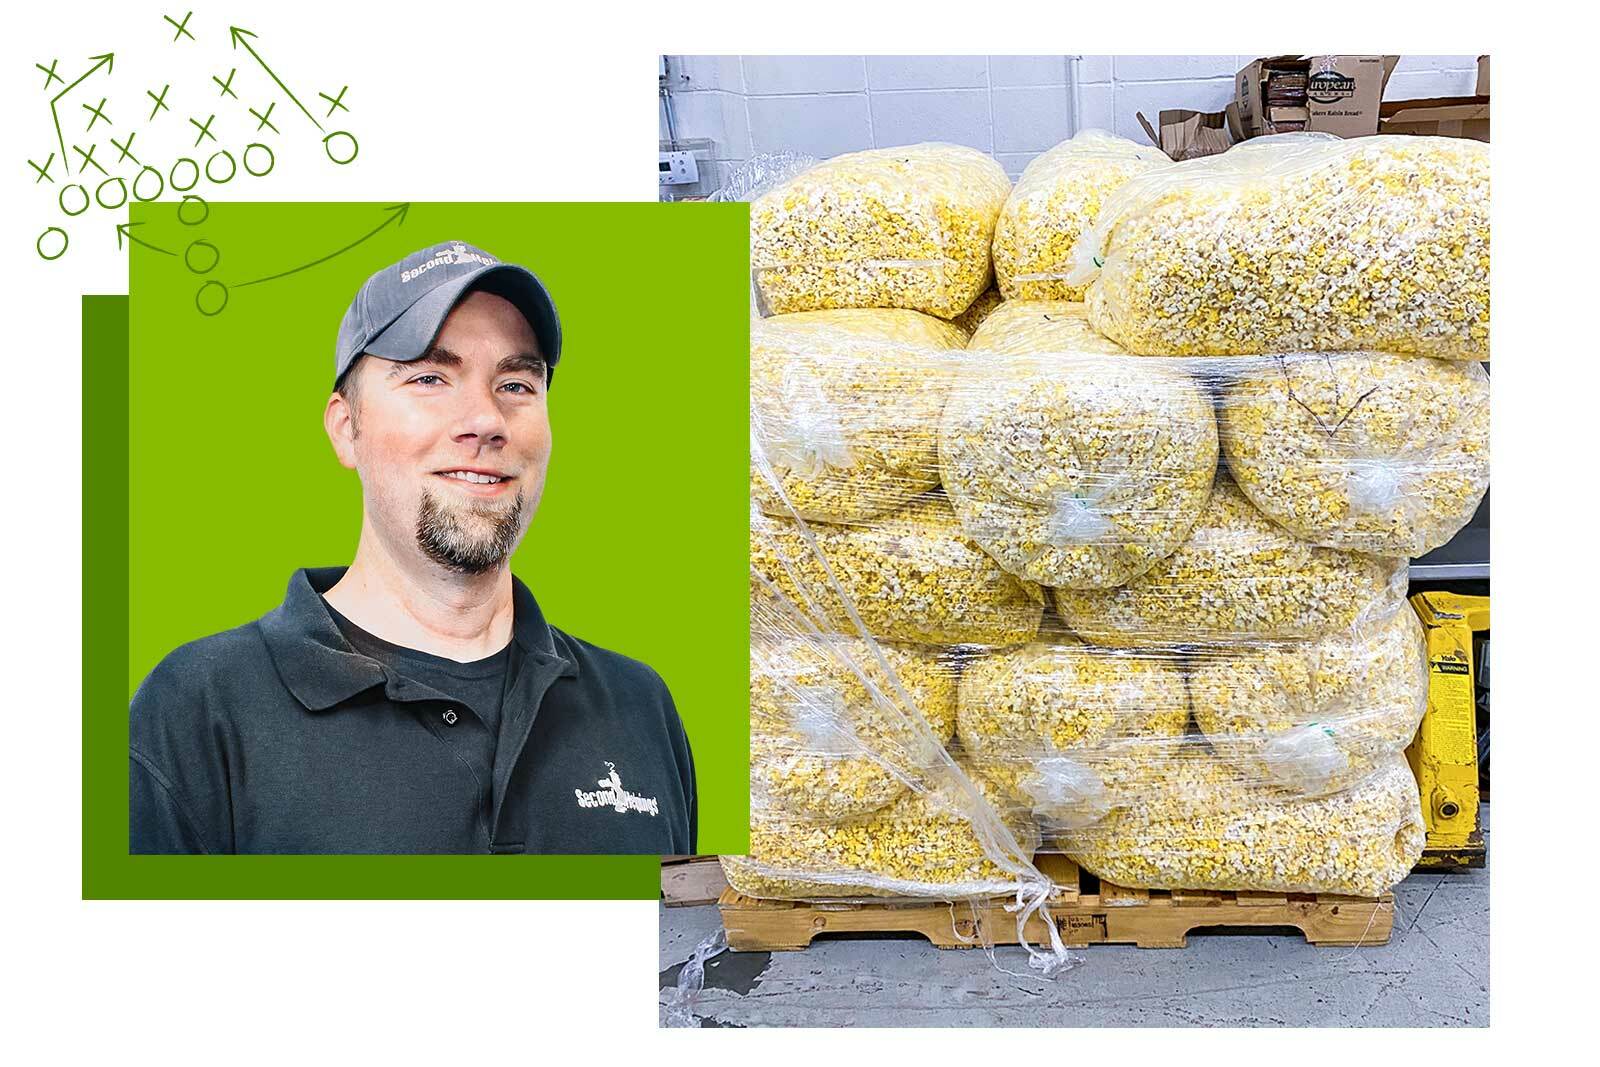 Photos of Jon Meinert and a large multi-bag pile of popcorn for donation. A sketch of a football play is in the upper left corner of the image.